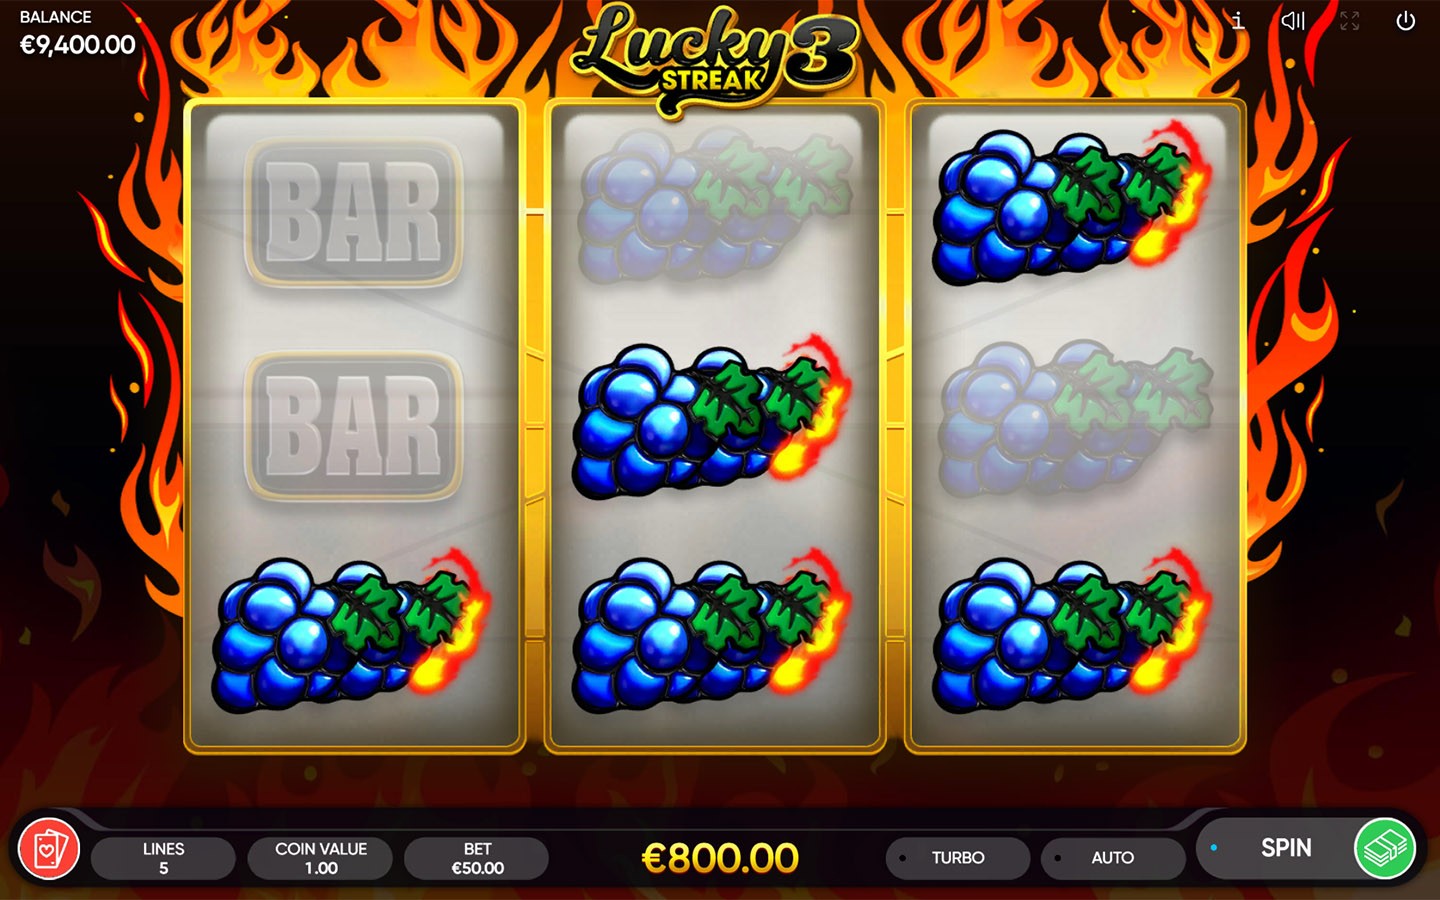 TOP FRUIT SLOTS 2020 | Try LUCKY STREAK 3 GAME now!